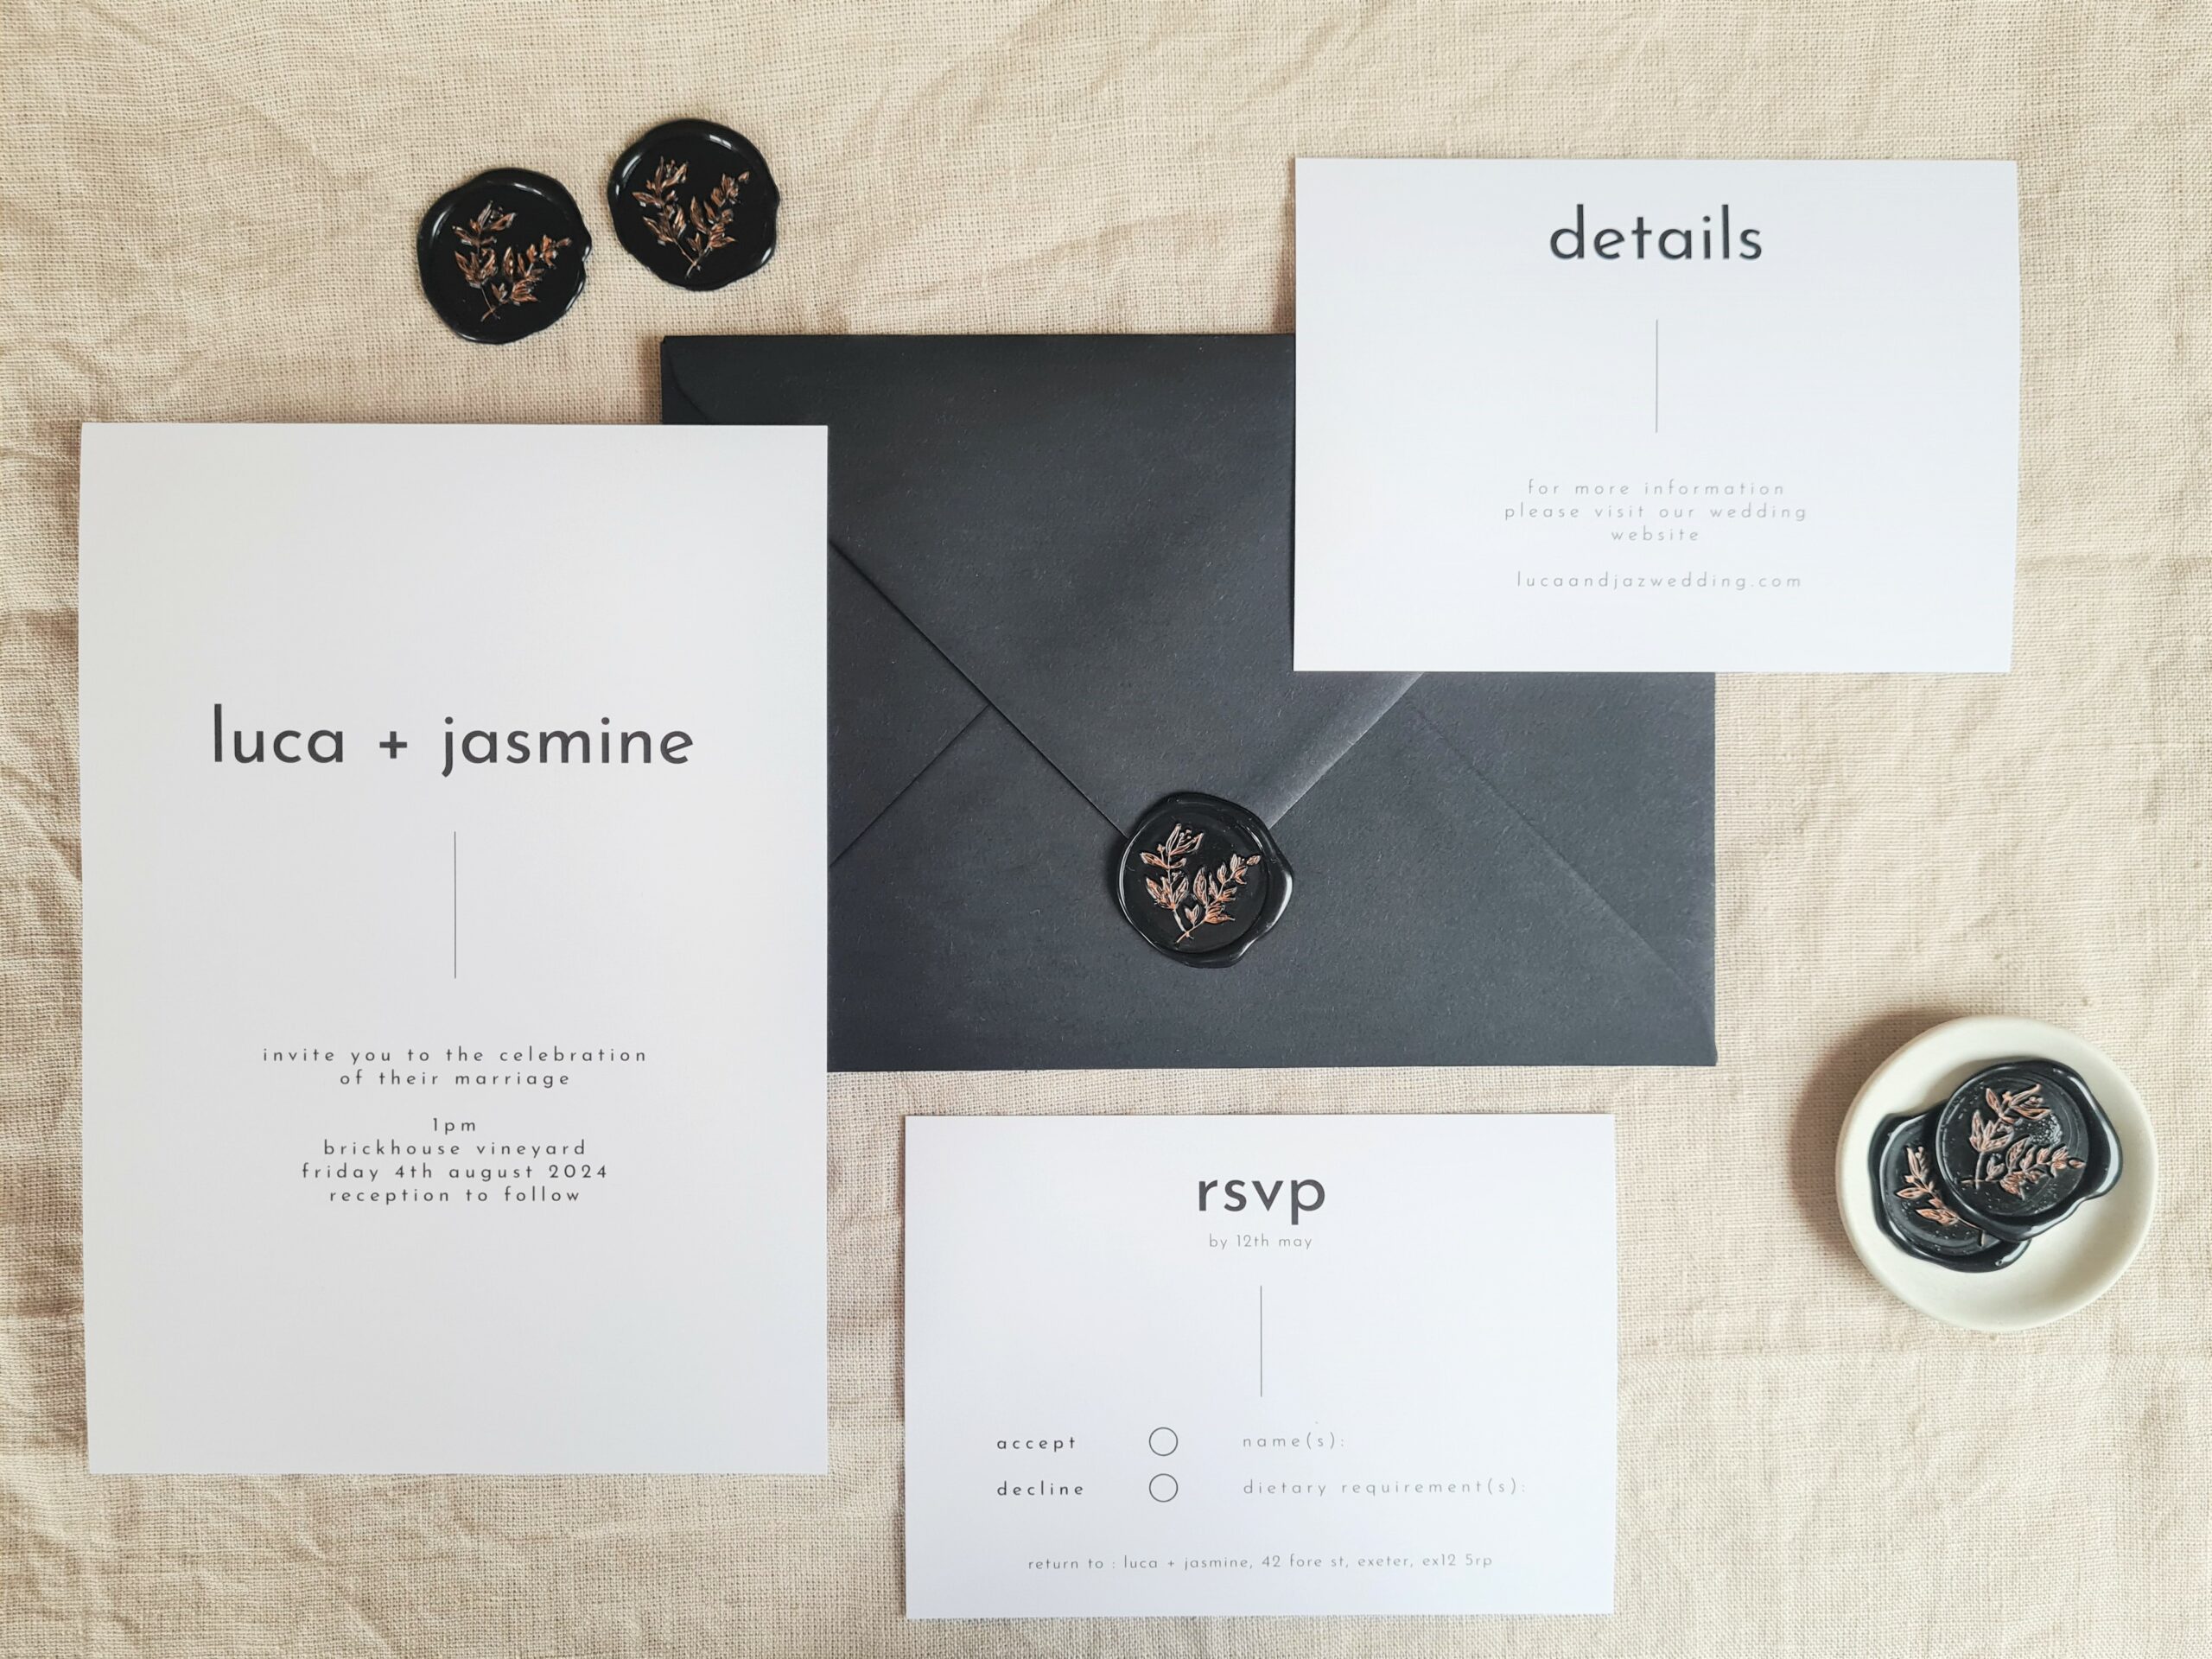 A black and white invitation suite flat lay. There is an RSVP card, invite and Details card. They are set against a beige linen background. Black wax seals, a mini white plate and a black envelope is arranged around it.